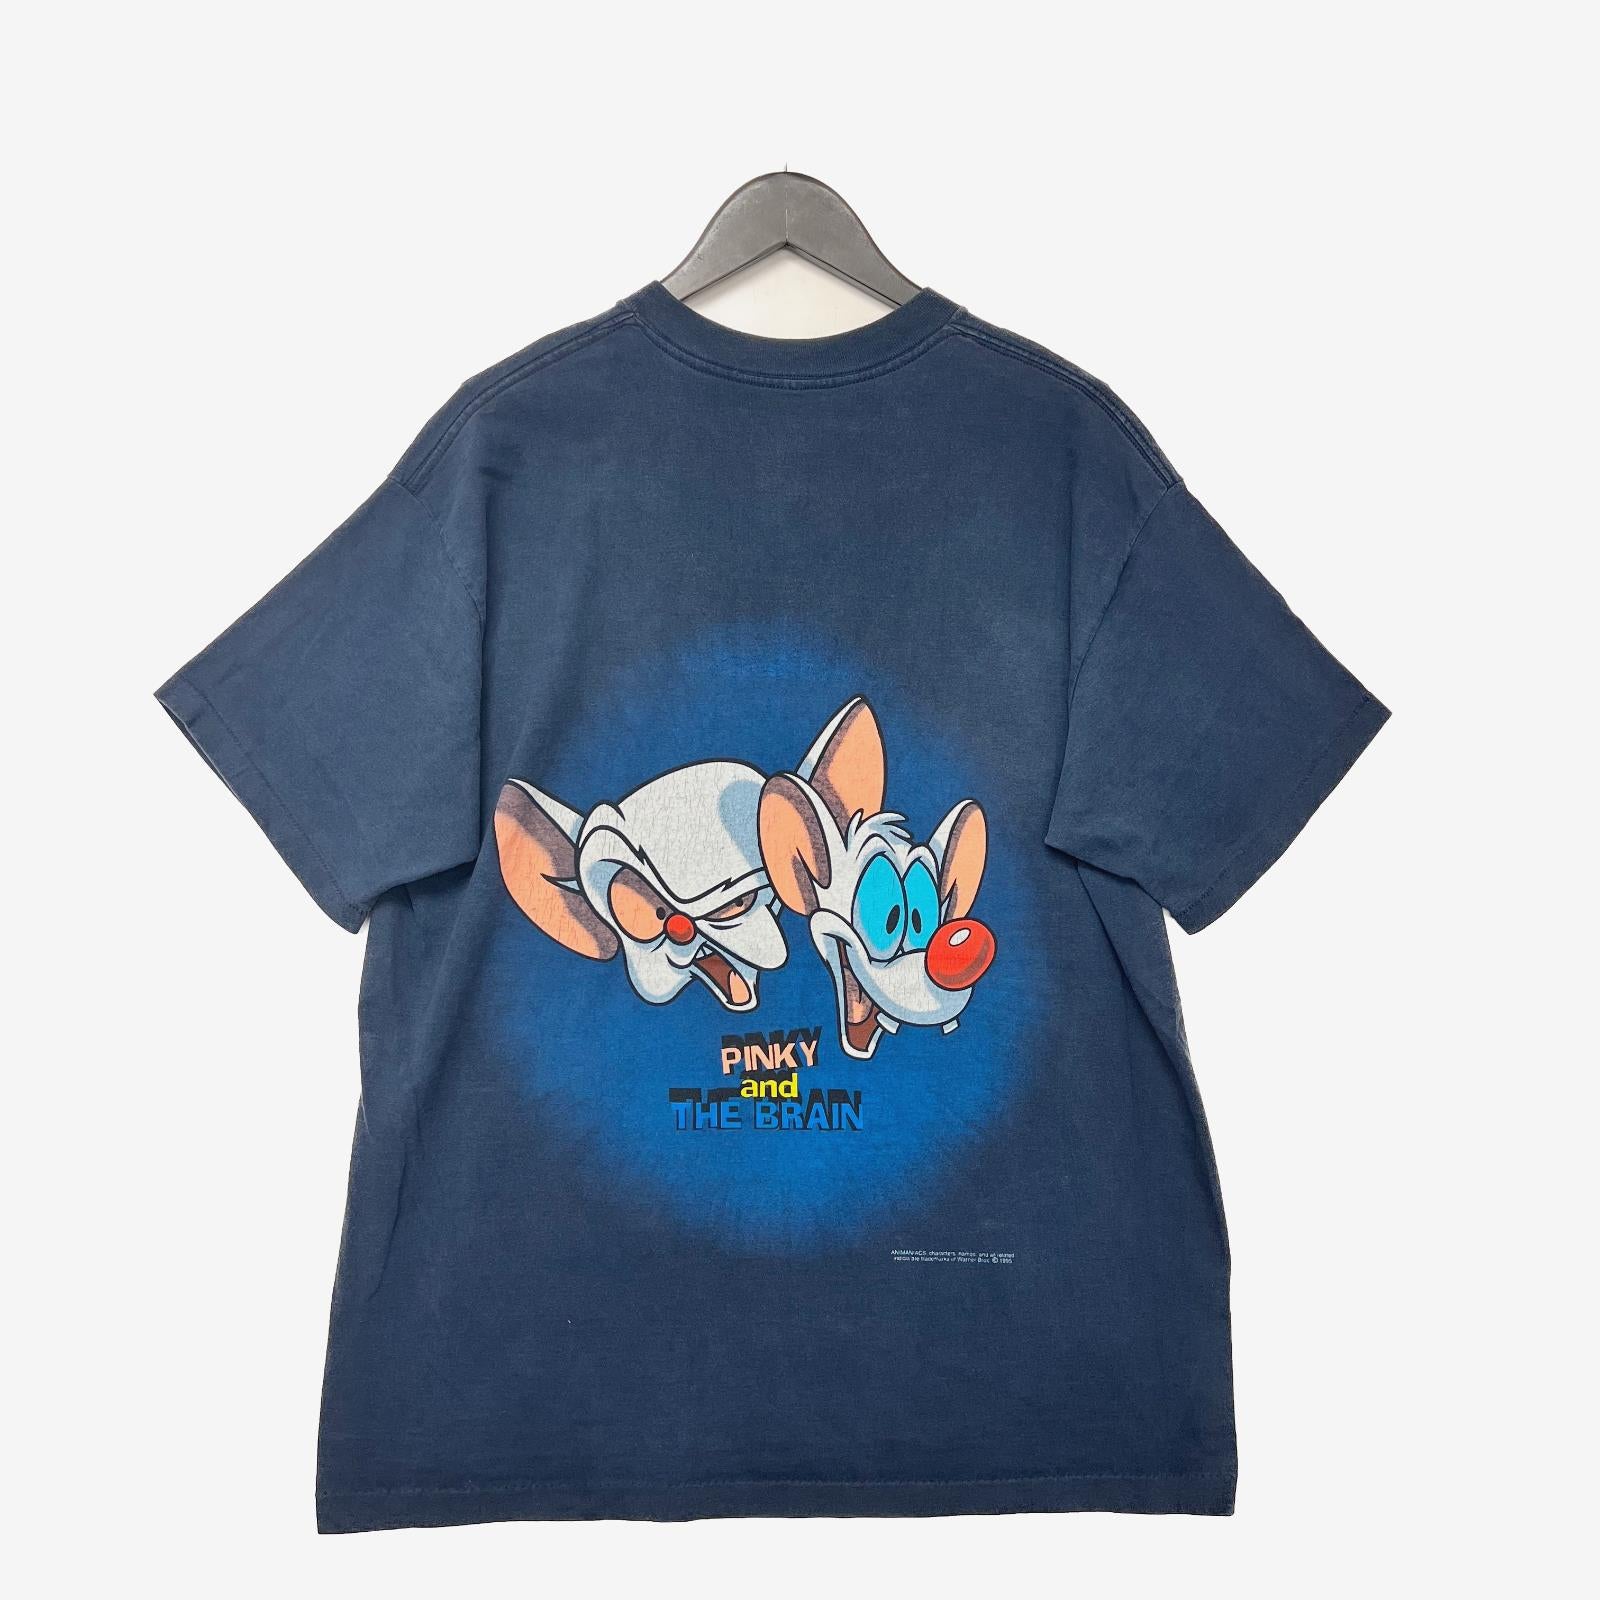 Pinky and the Brains T-shirt Size L